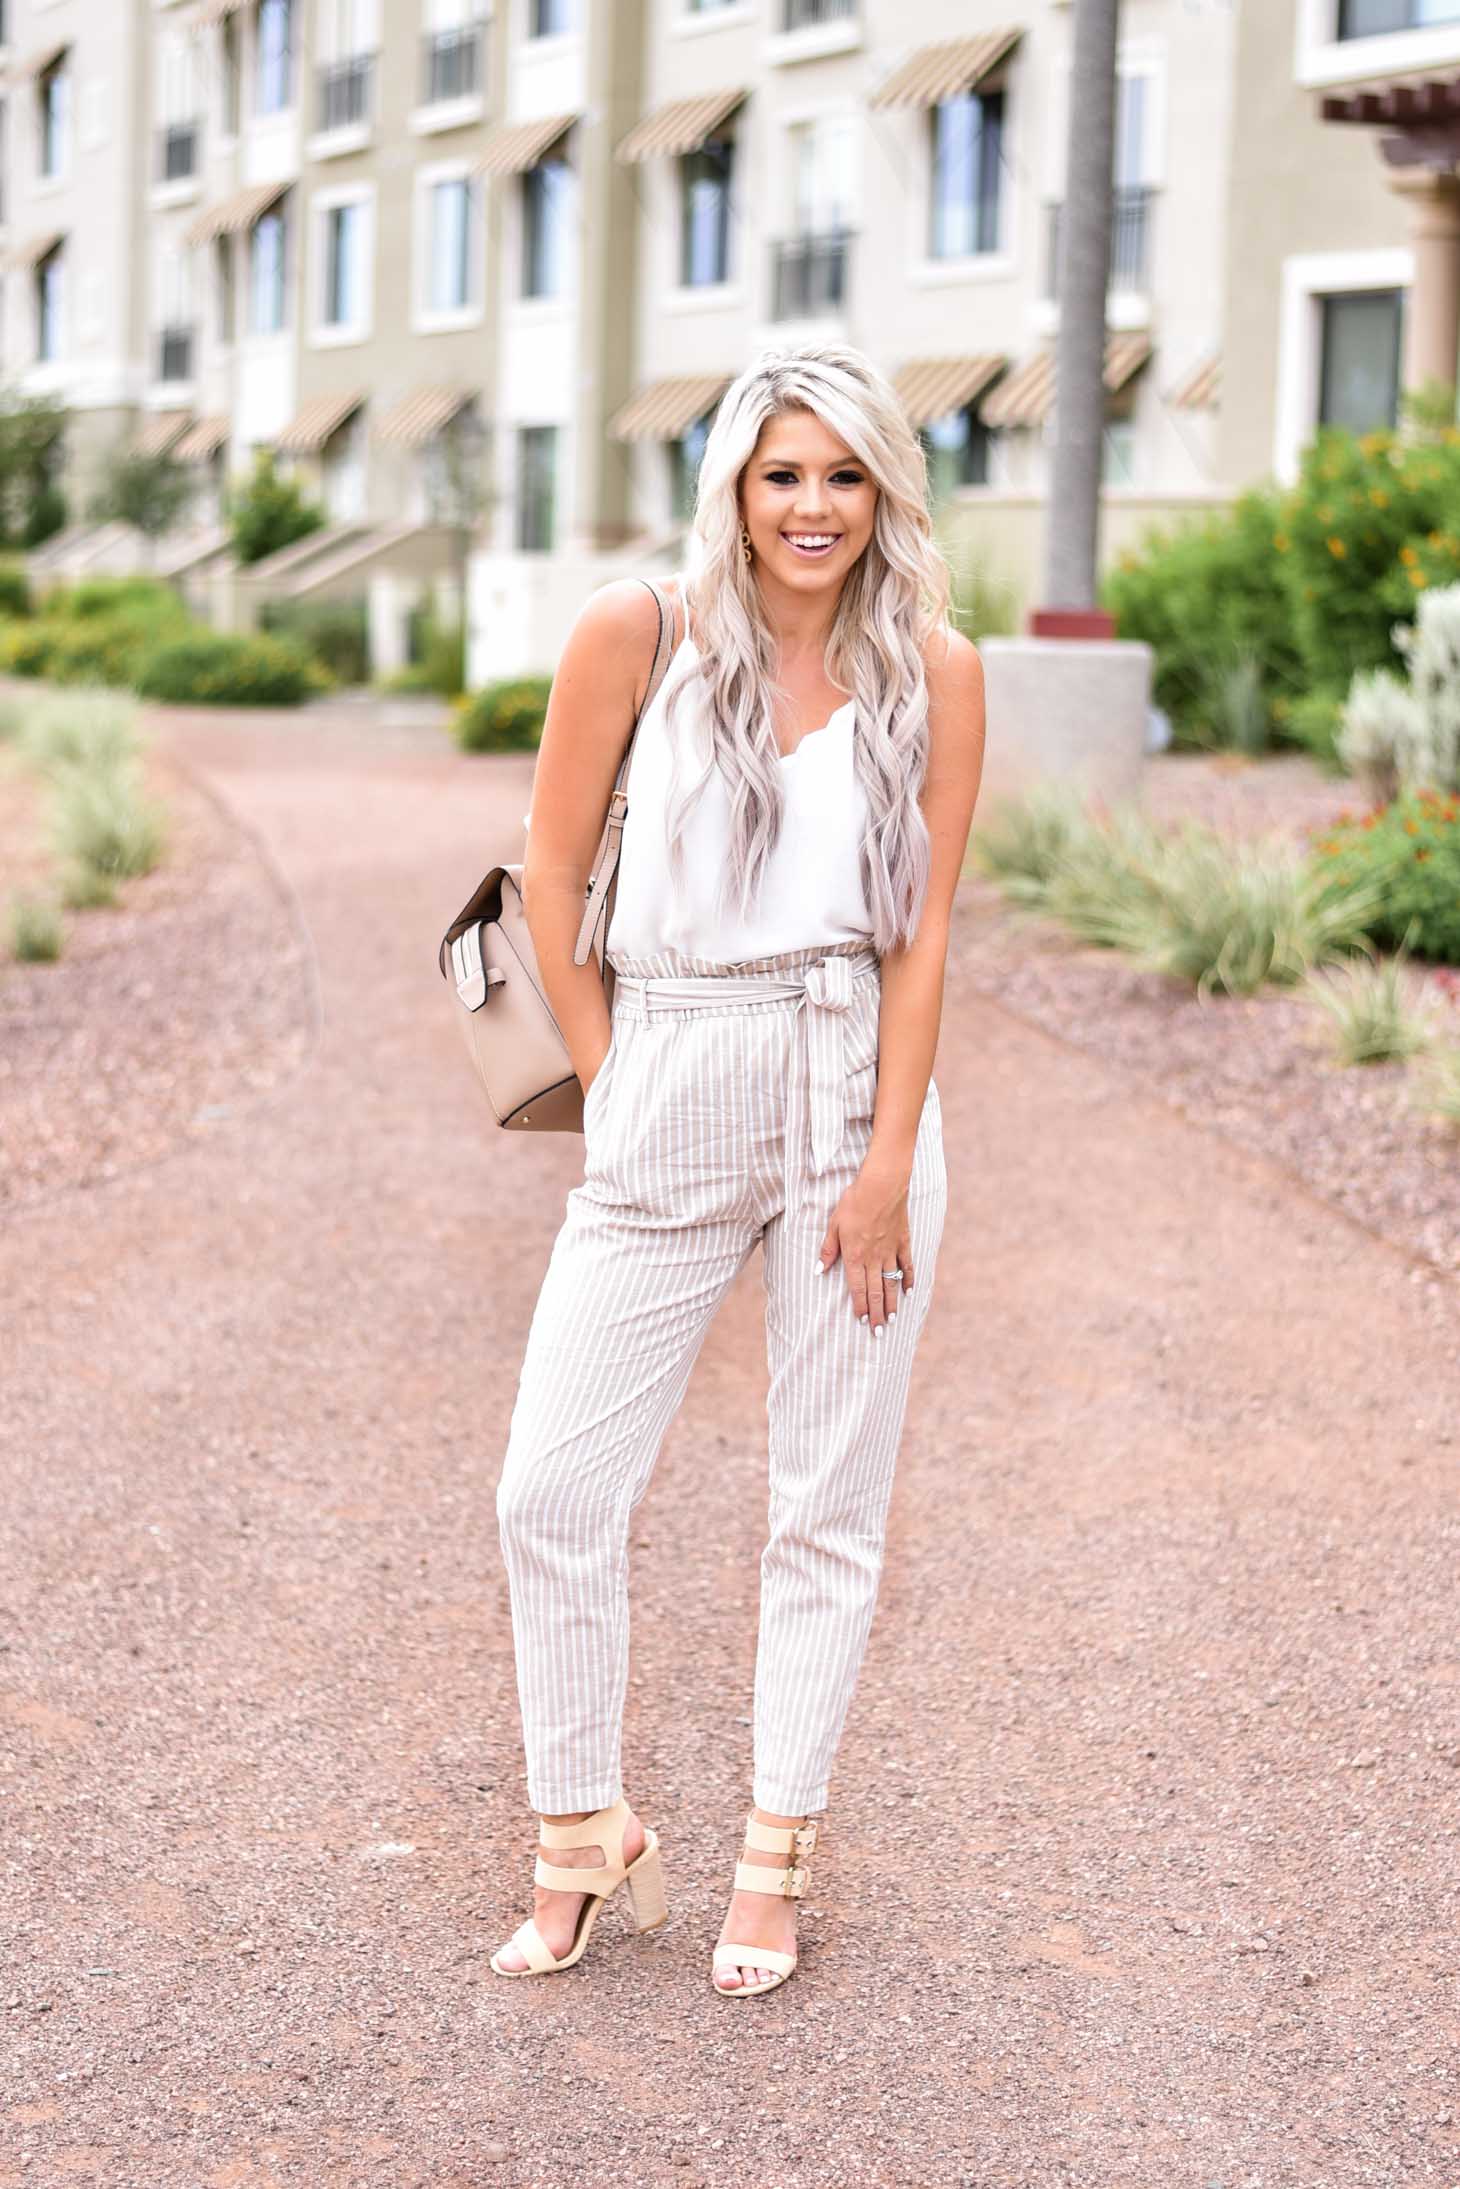 Erin Elizabeth of Wink and a Twirl shares this Red Dress Boutique look with the cutest highwaist pants ad white cami